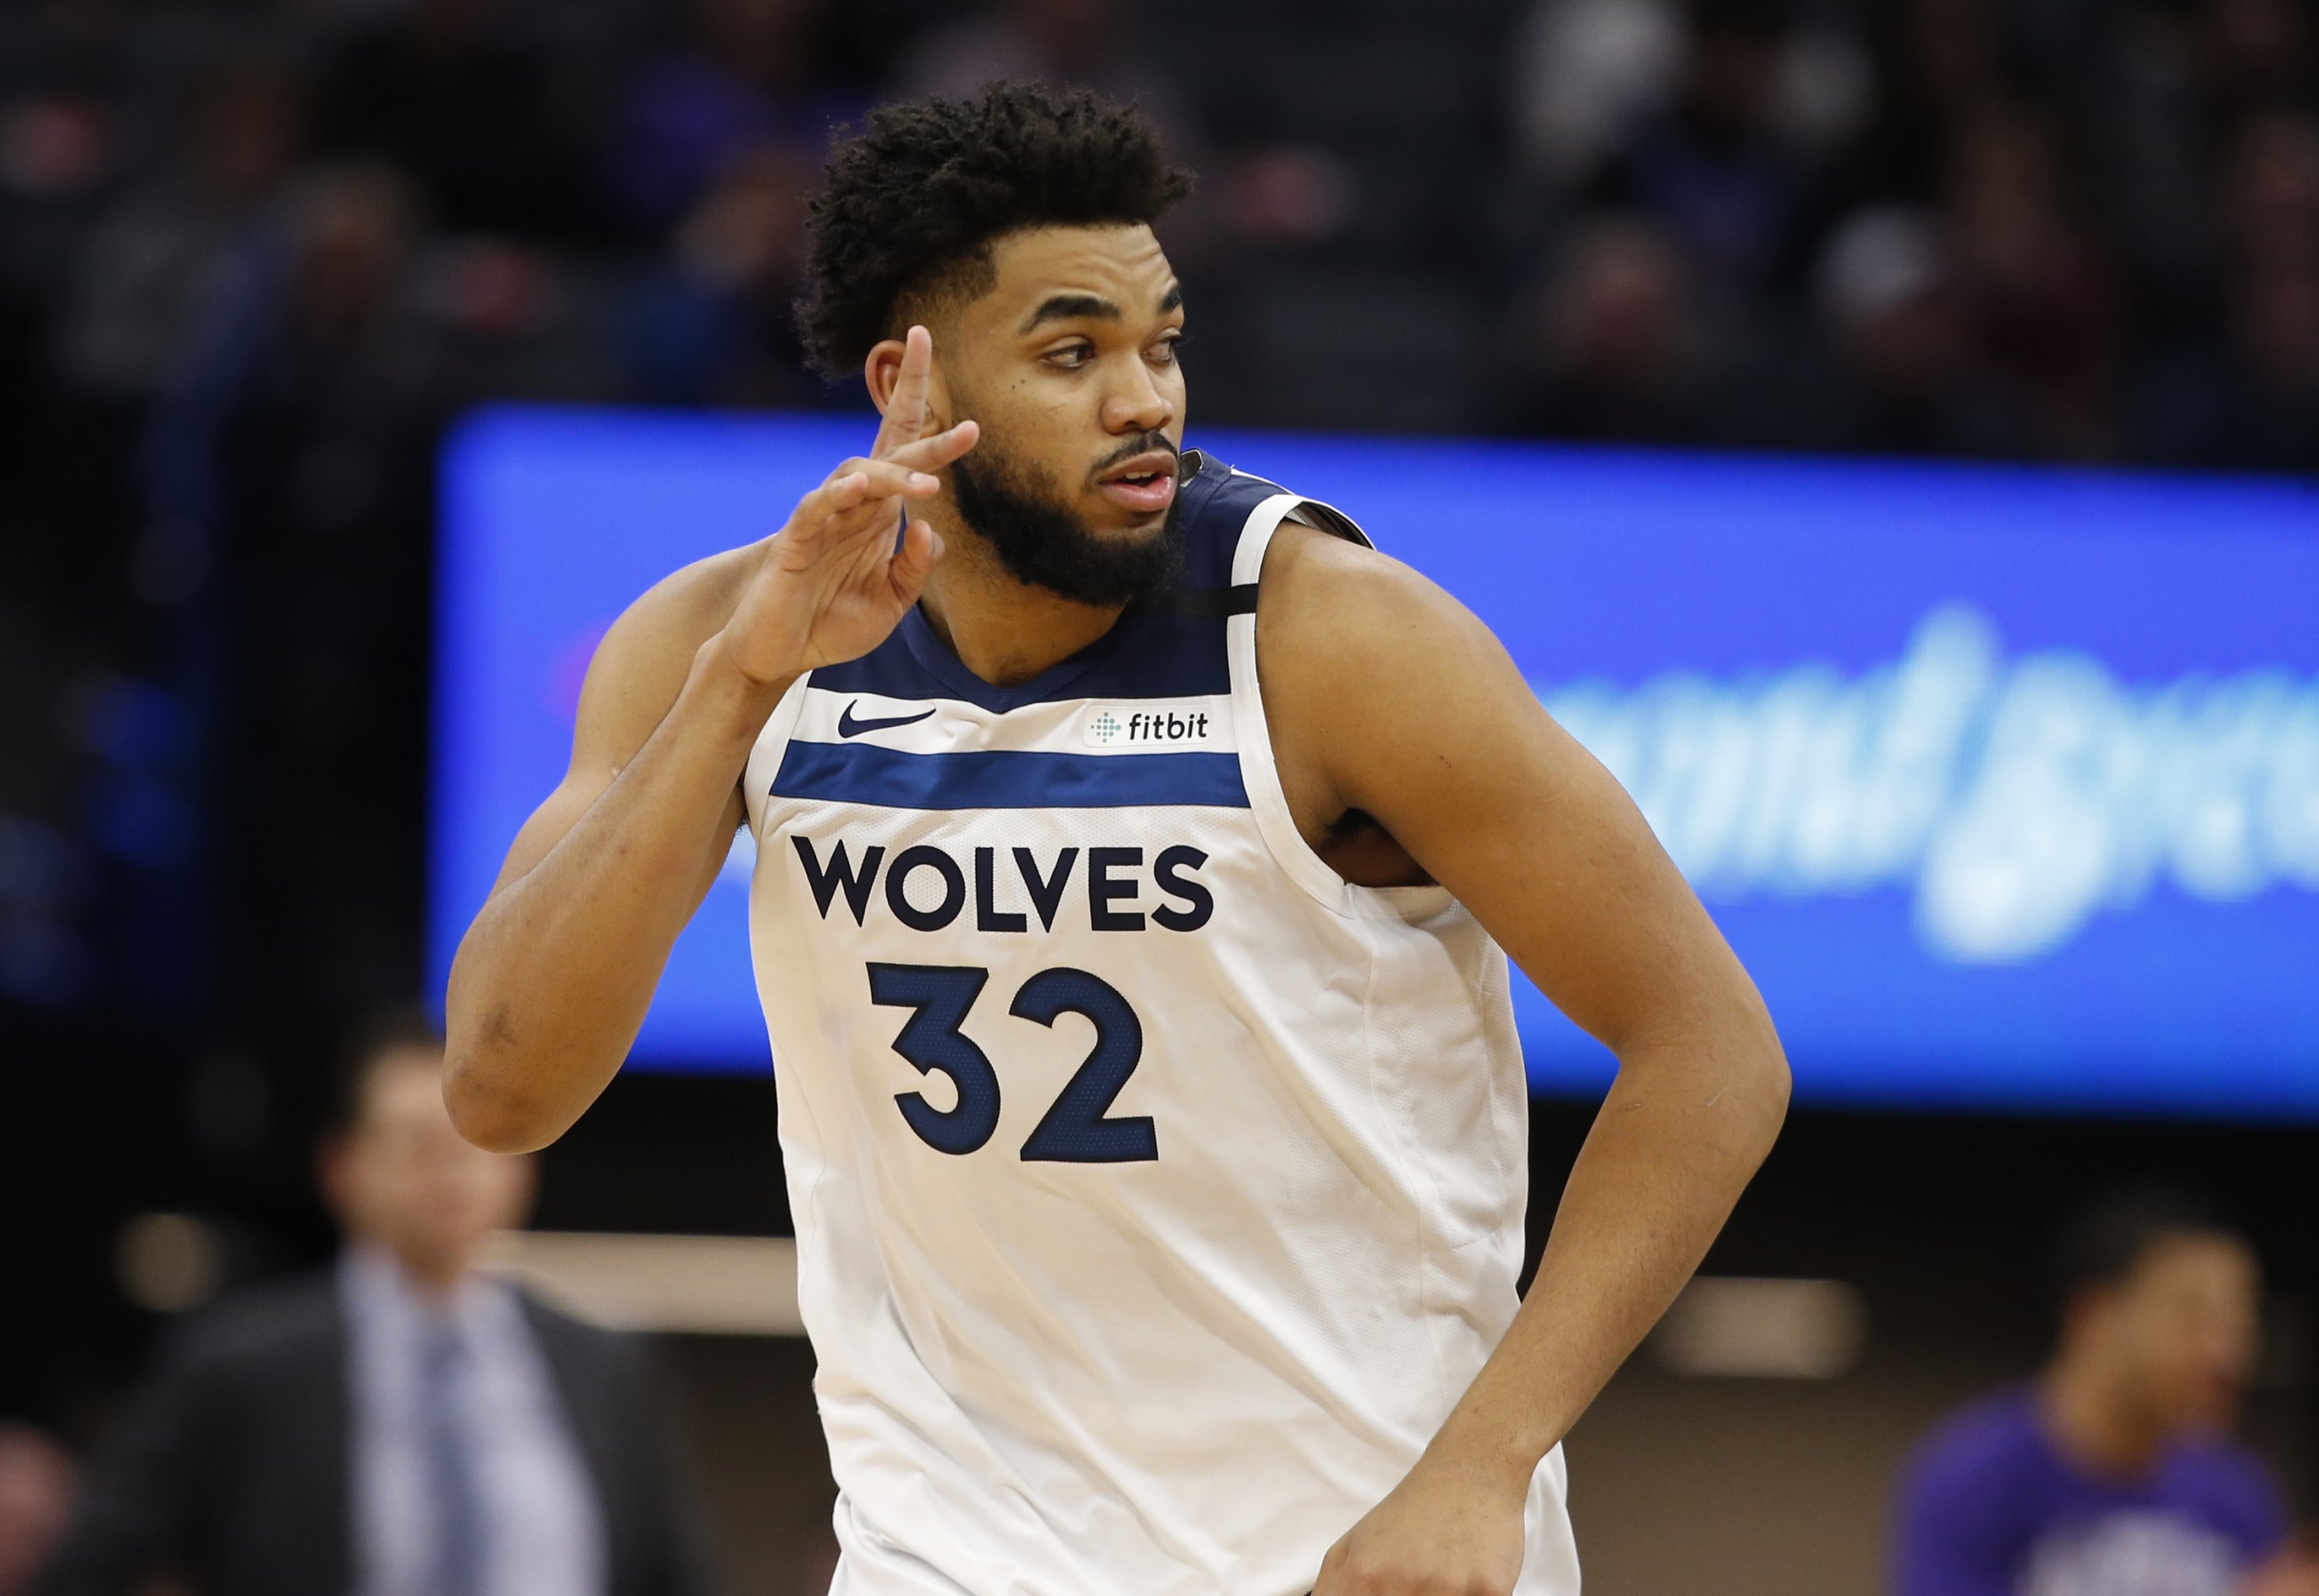 Karl-Anthony Towns erupts for emotional 27 points as Wolves defeat